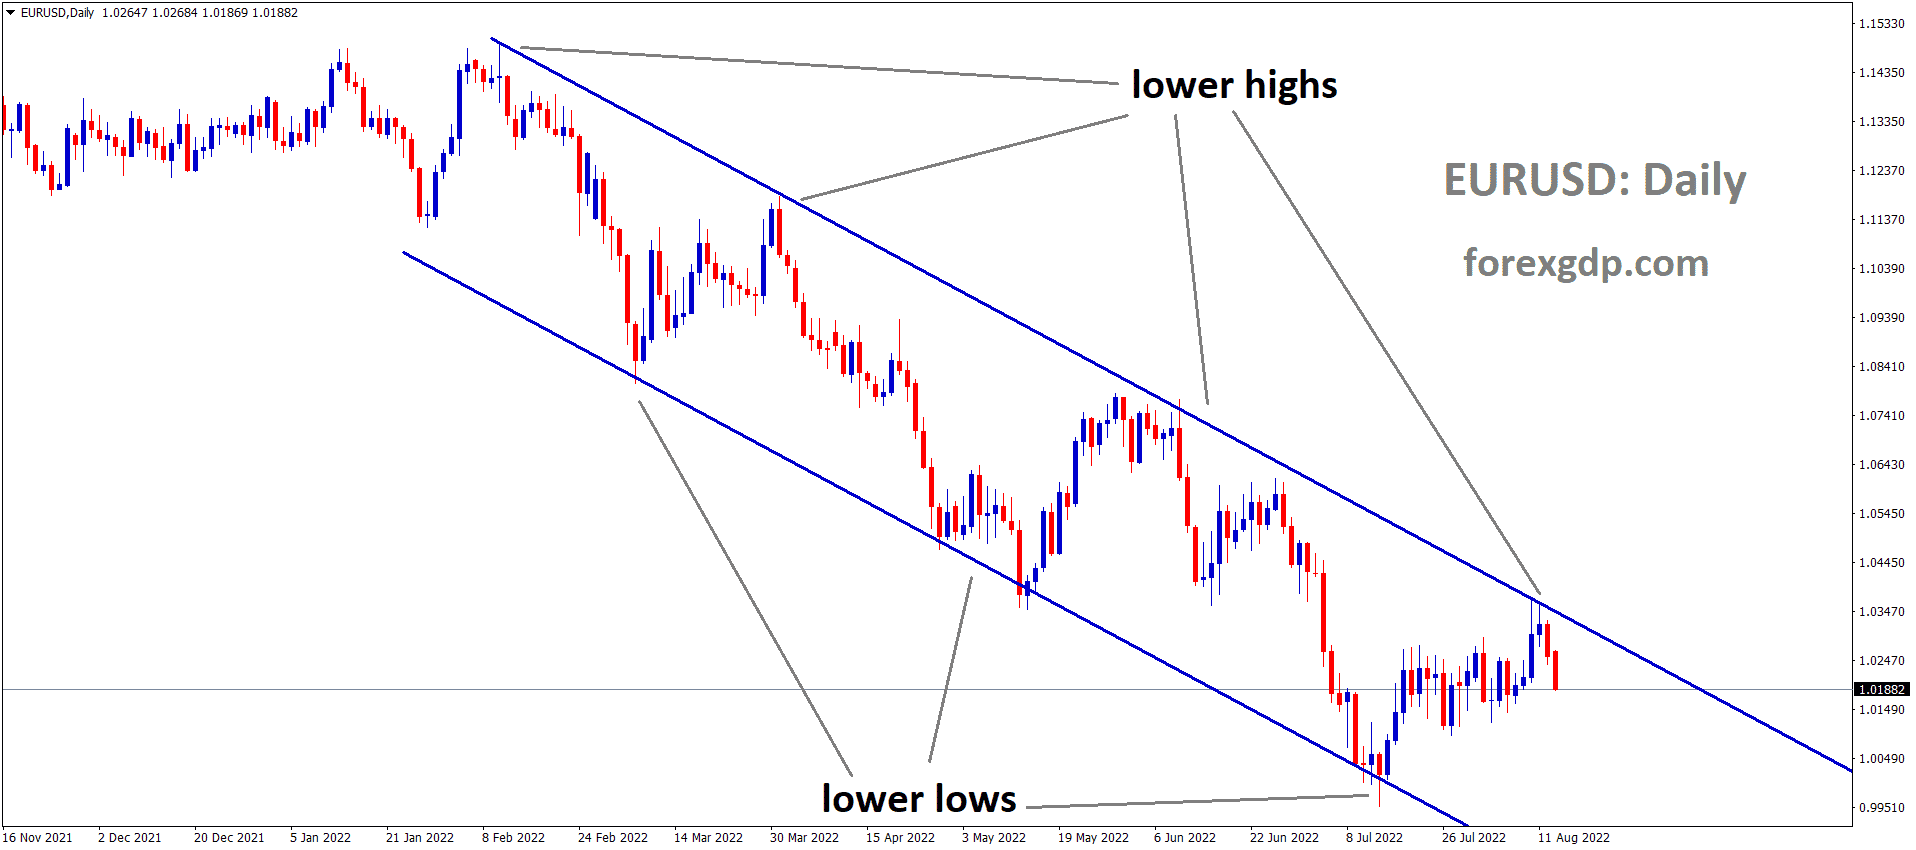 EURUSD is moving in the Descending channel and the Market has fallen from the Lower high area of the channel